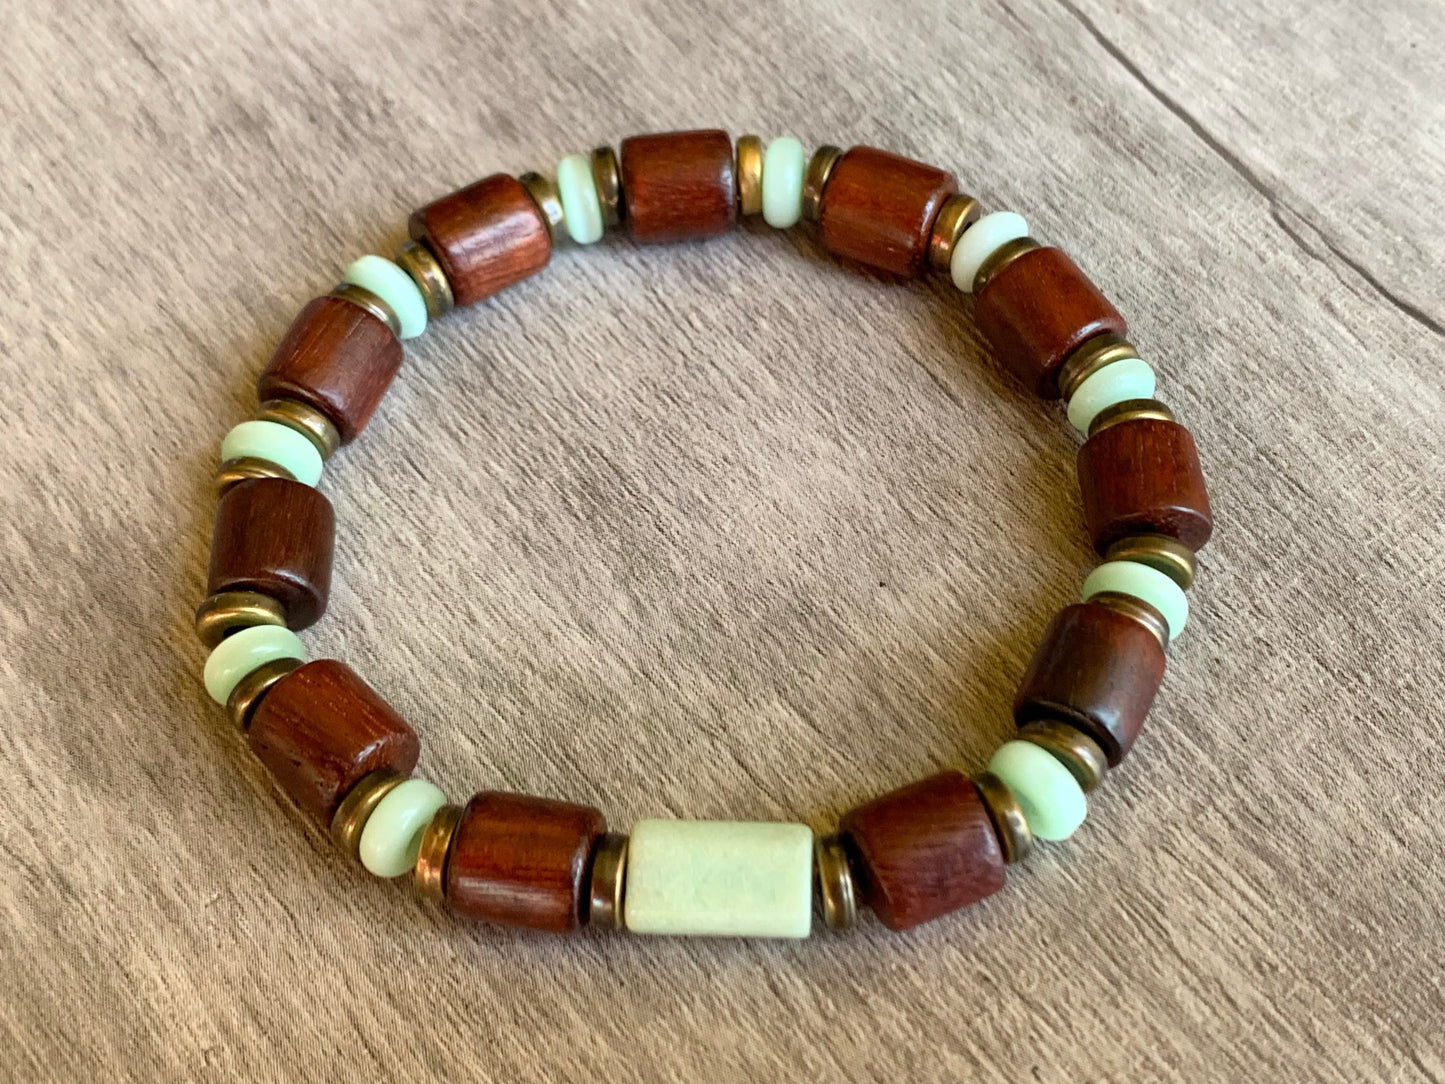 Cameron Handmade Chrysoprase, Cats Eye, Wood, and Antique Gold Expandable Bracelet